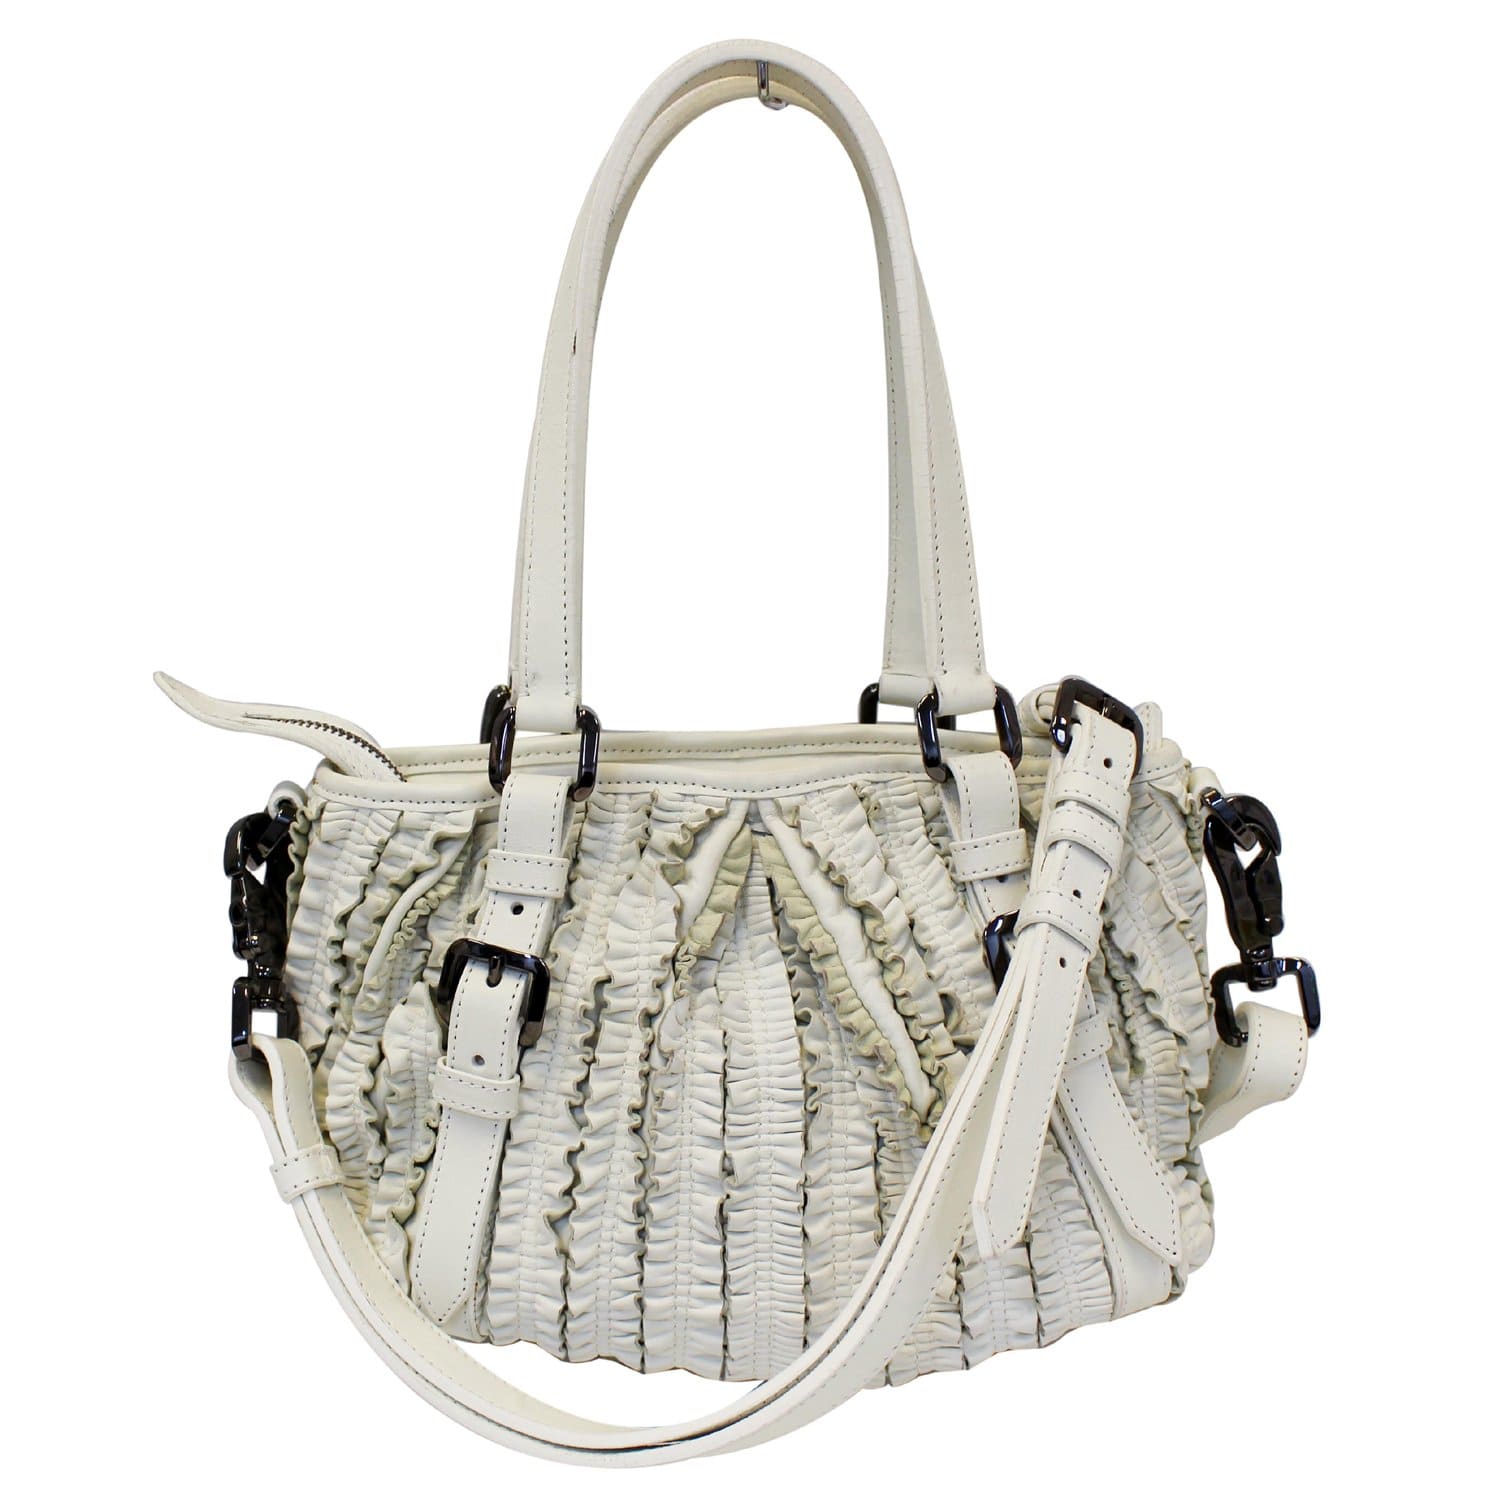 BURBERRY Ruffle Small Lowry White Leather Shoulder Bag-US